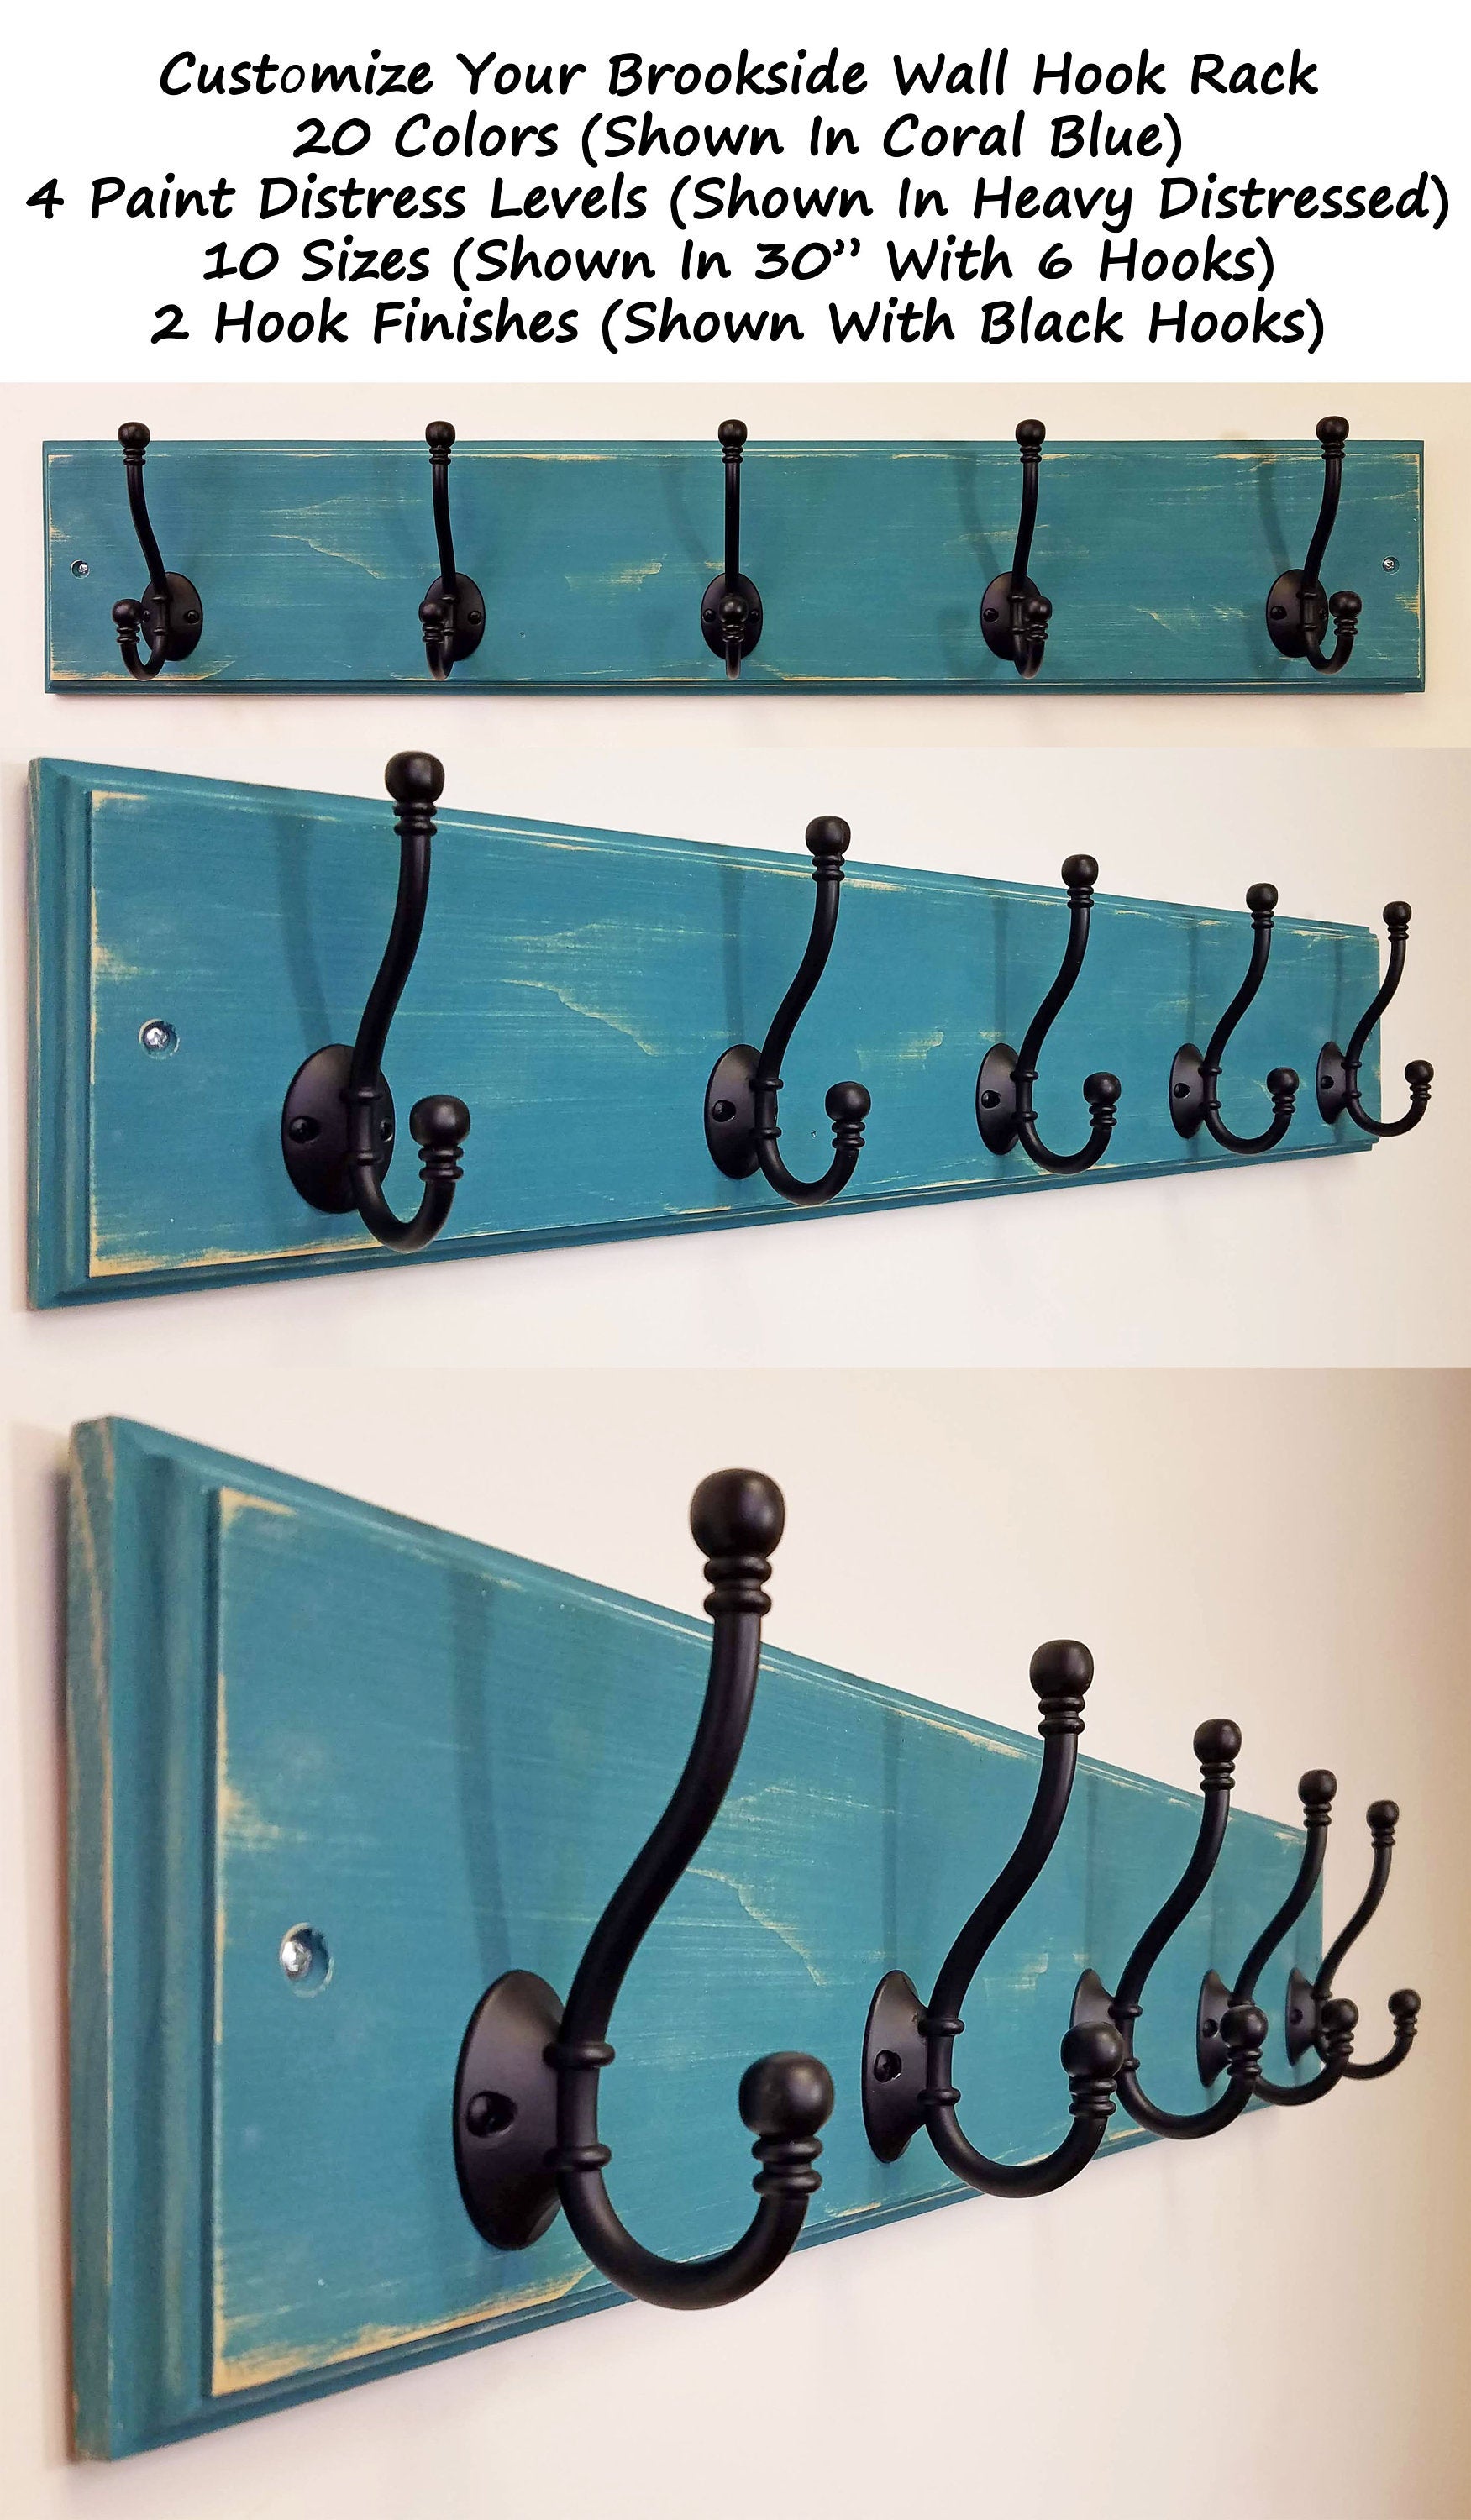 Brookside Wall Mounted Hook Rack - 20 Paint Colors, Shown in Coral Blue